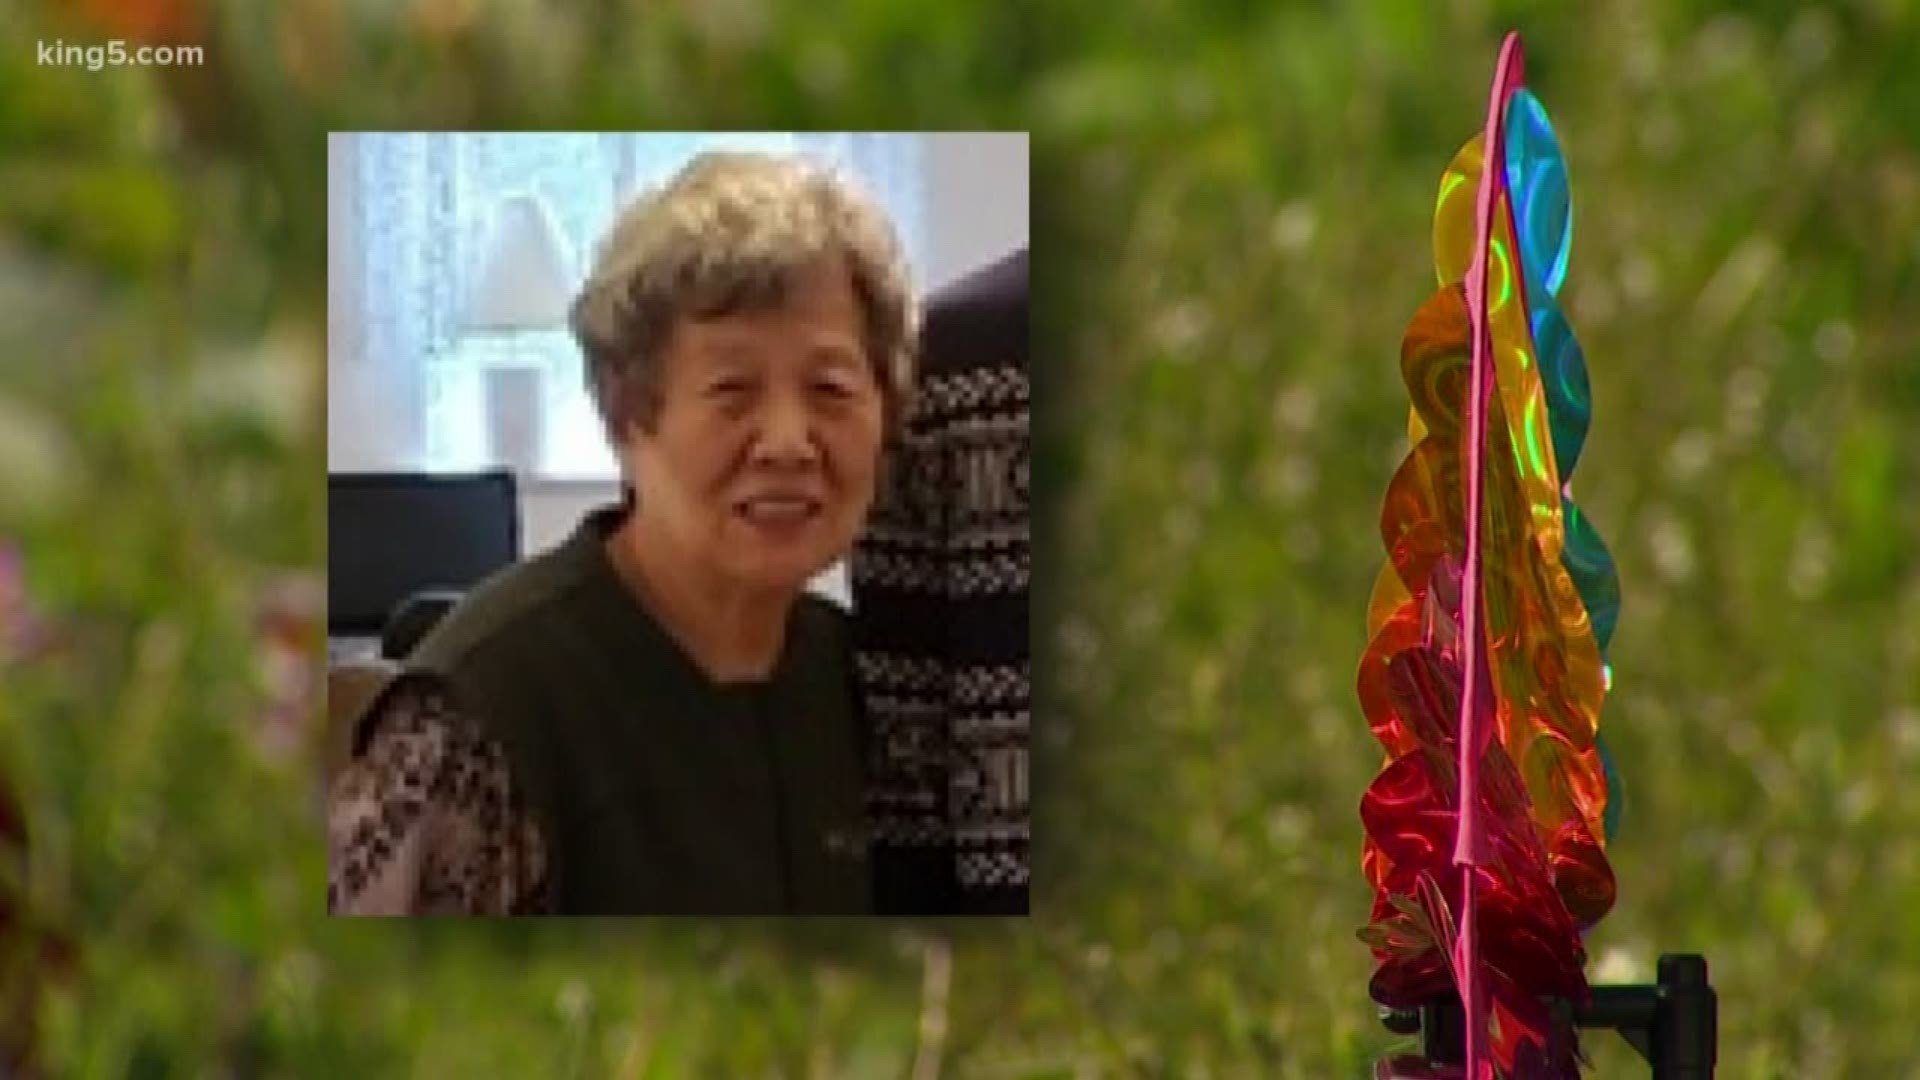 Pierce County detectives say they are close to finding the suspects in the murder of a convenience store owner in Puyallup. And the community wants to make sure justice is served for her family. KING 5's Jenna Hanchard tells us more about the 79-year-old store owner who meant so much to so many people.